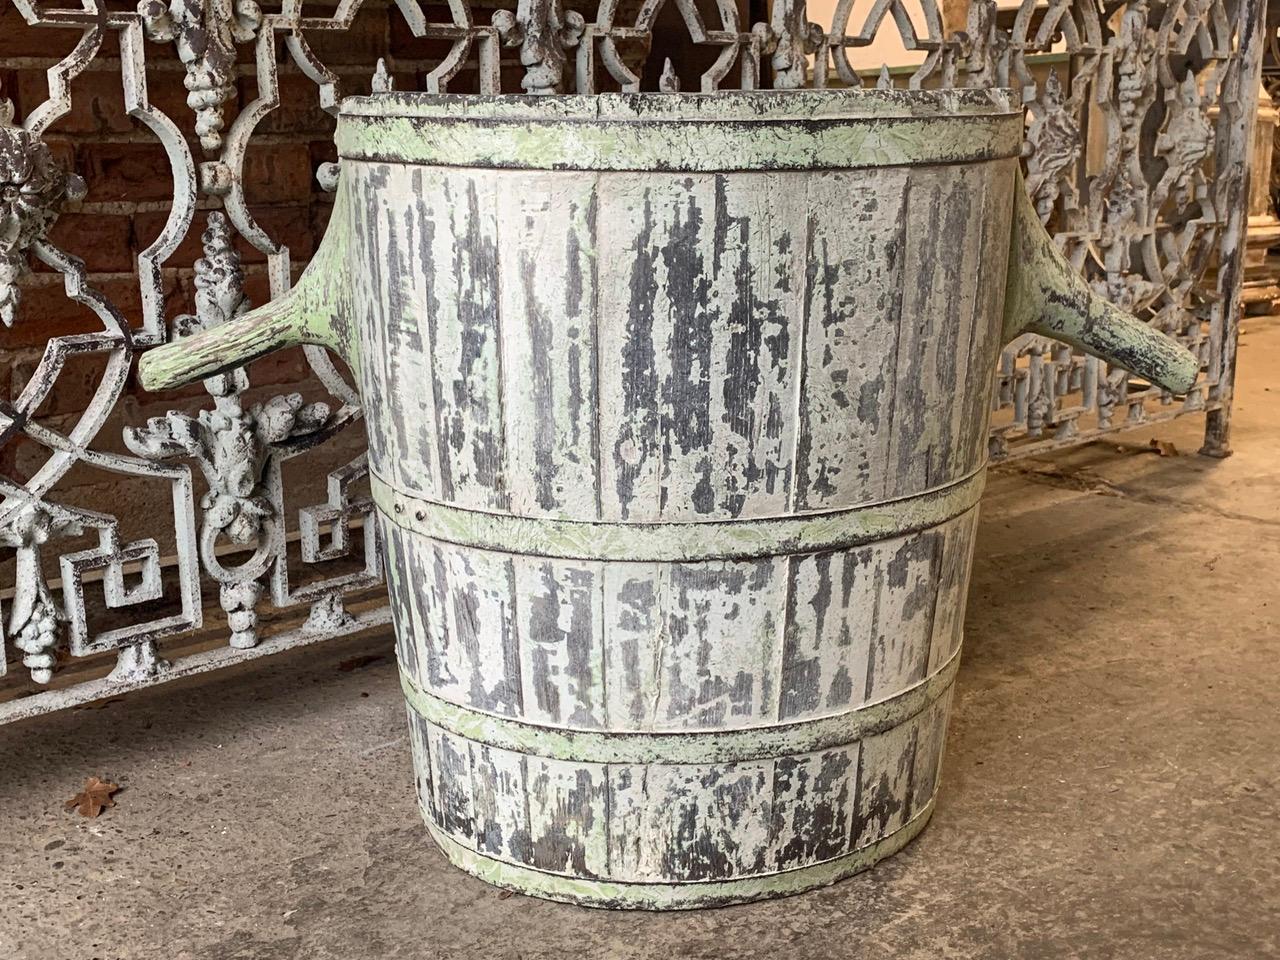 A nice Chestnut wood 19th century French grape harvesting hod. With beautiful original worn paint which gives it a good decorative look. It has its original iron bands and branch handles. 
This would make a wonderful log bin by the fire.